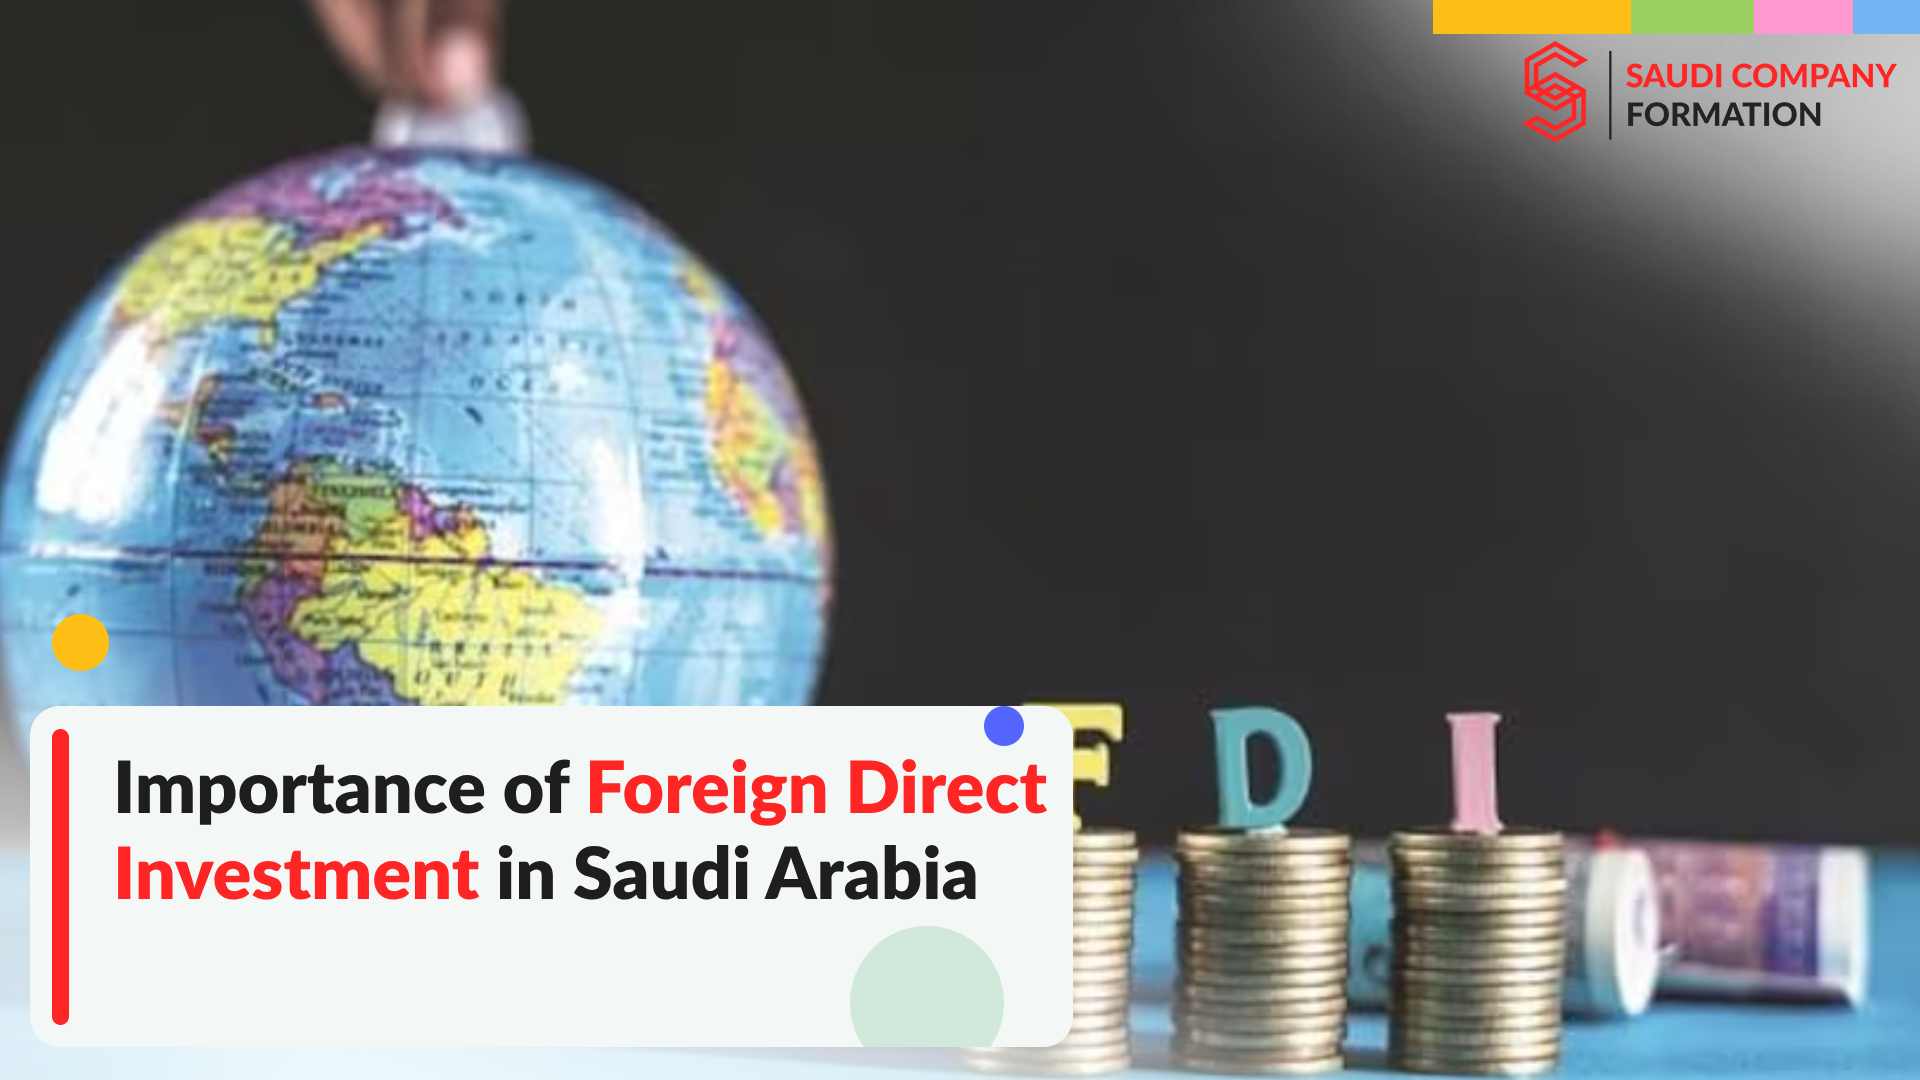 foreign direct investment in Saudi Arabia